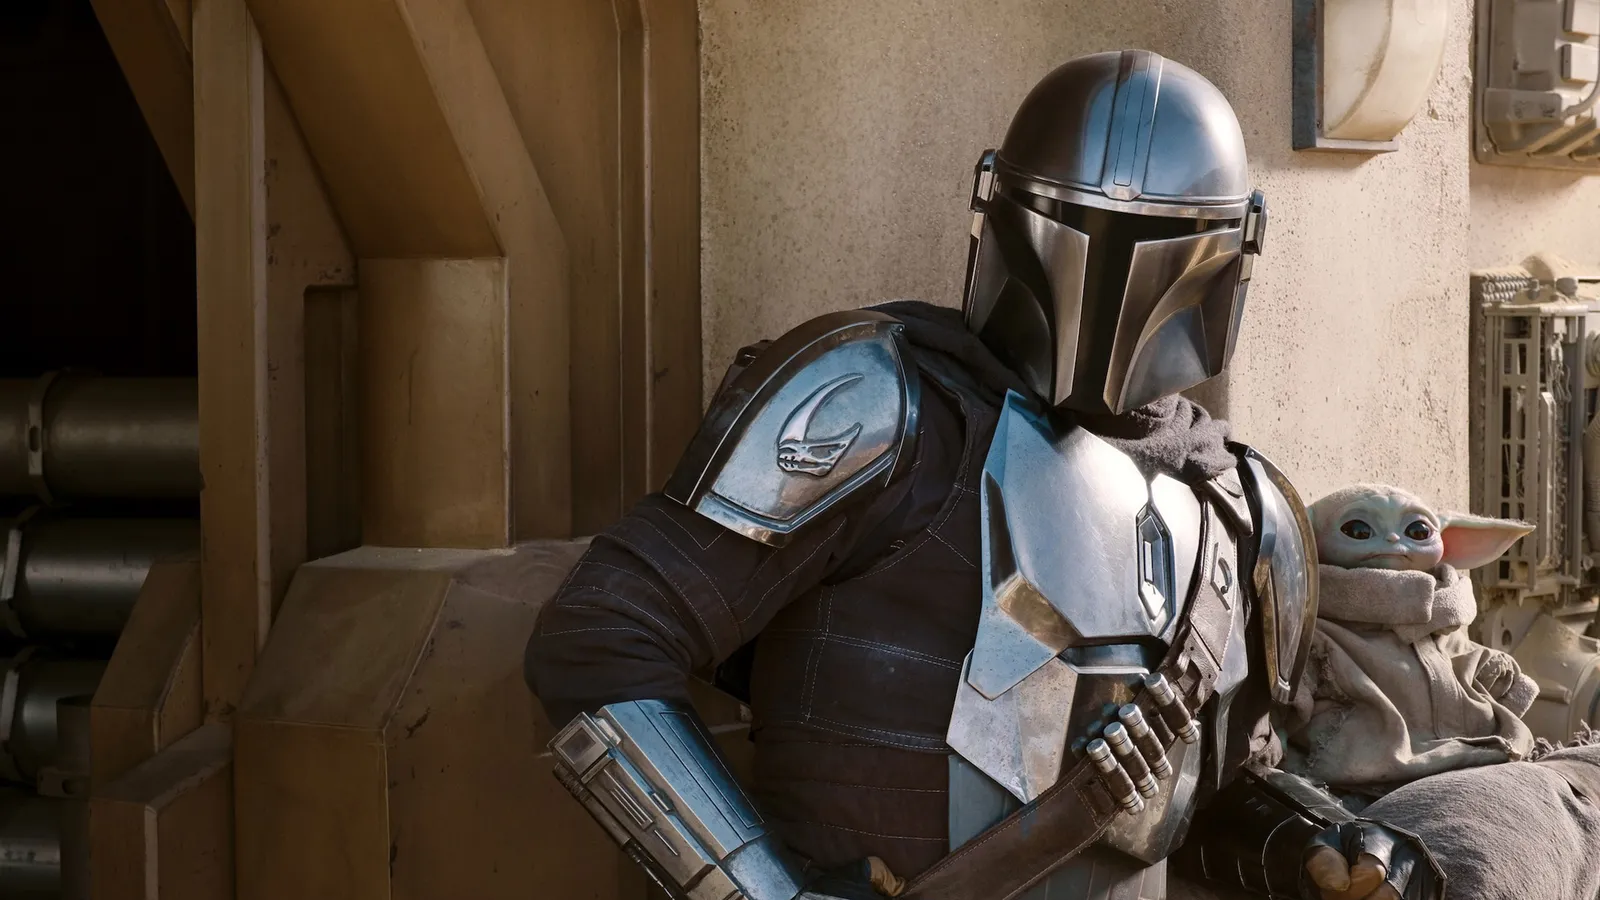 The Mandalorian: Why Do We Love Westerns?